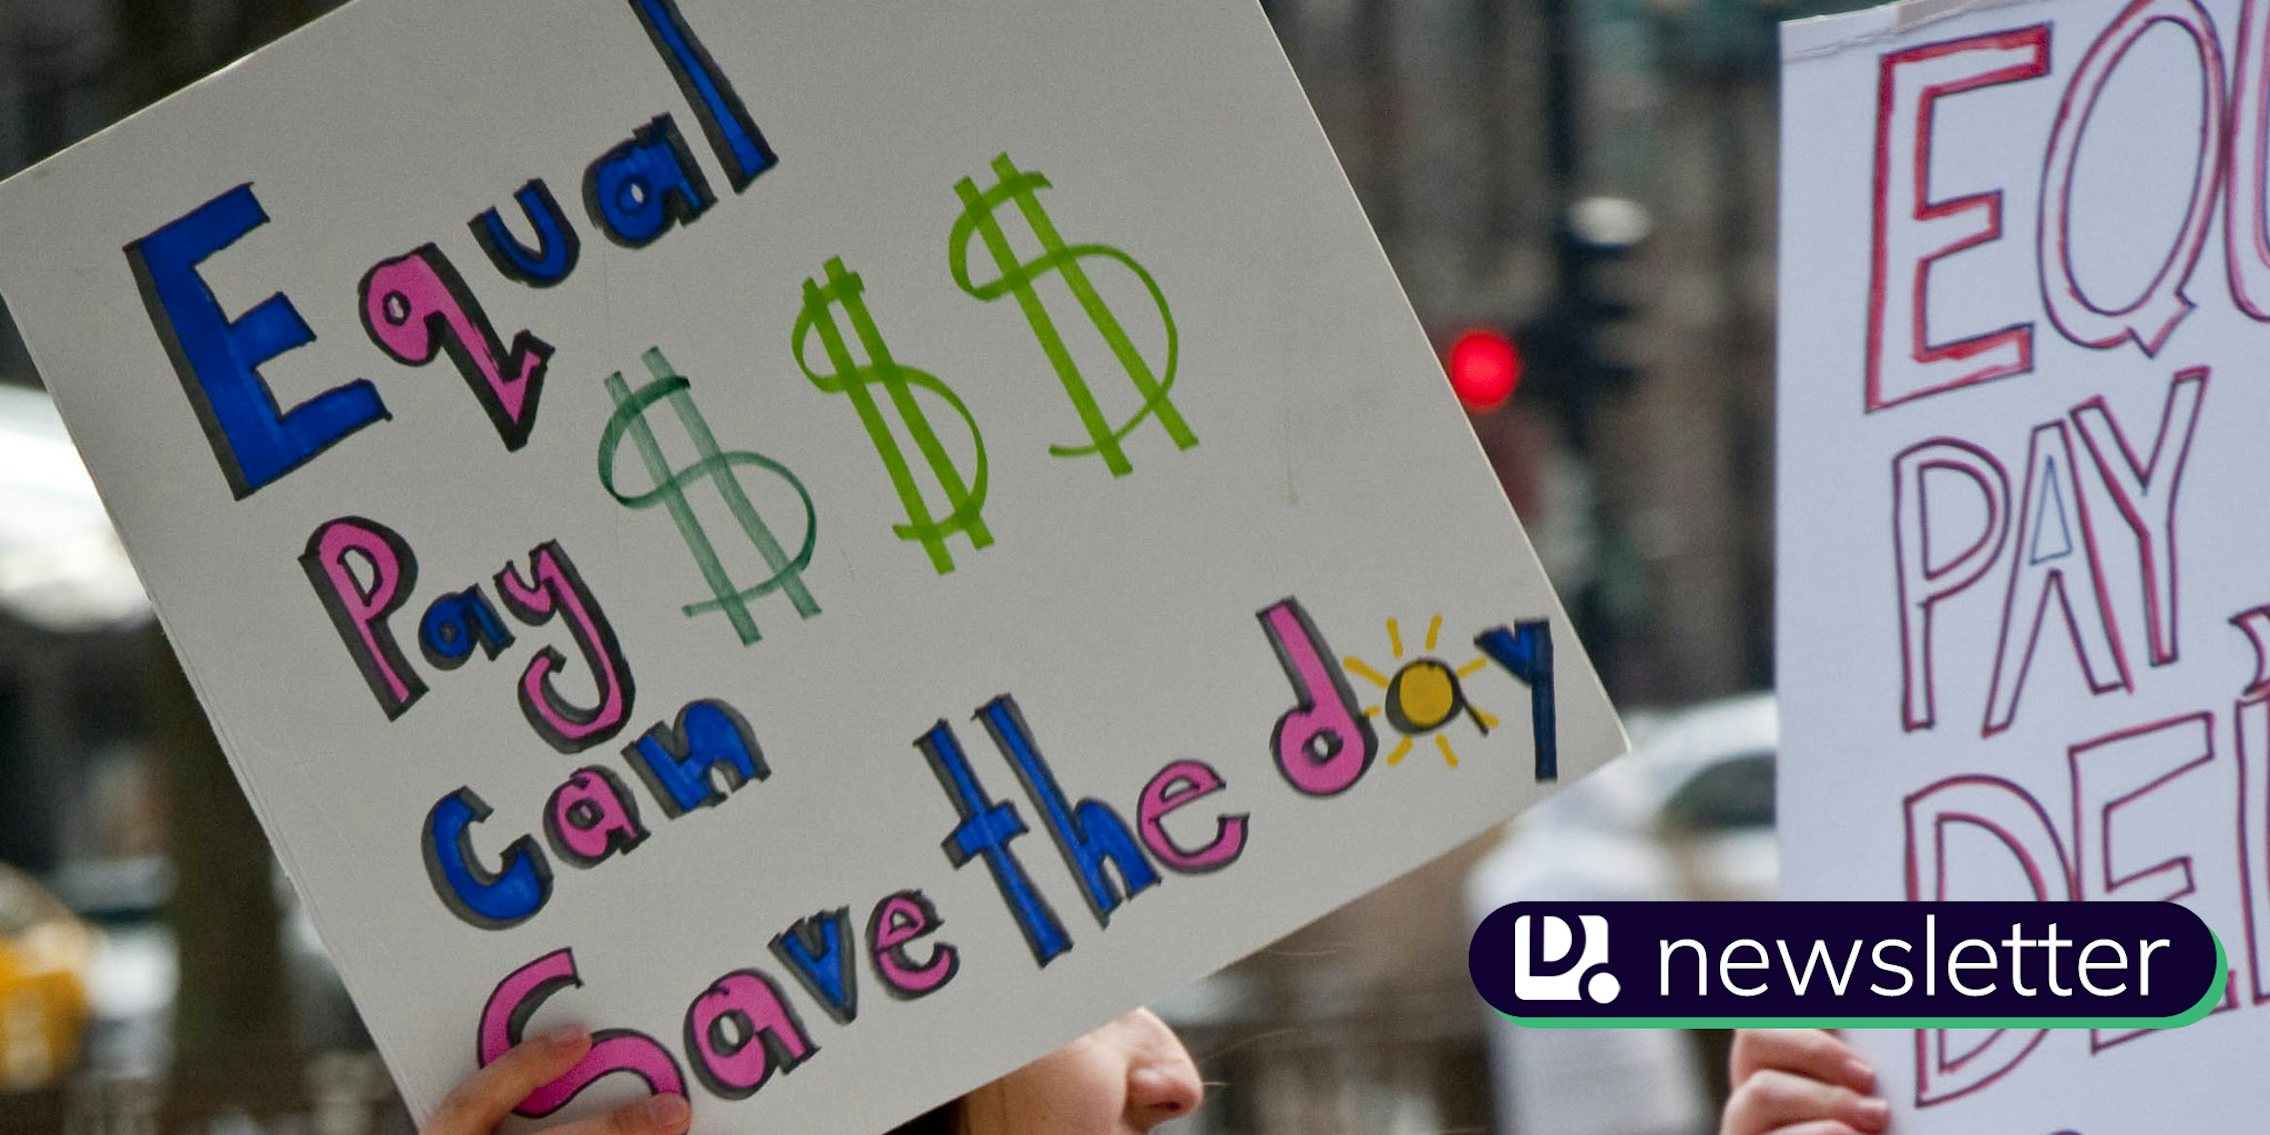 A sign that says 'Equal Pay Can Save The Day.' In the lower right corner, the Daily Dot newsletter logo can be seen.